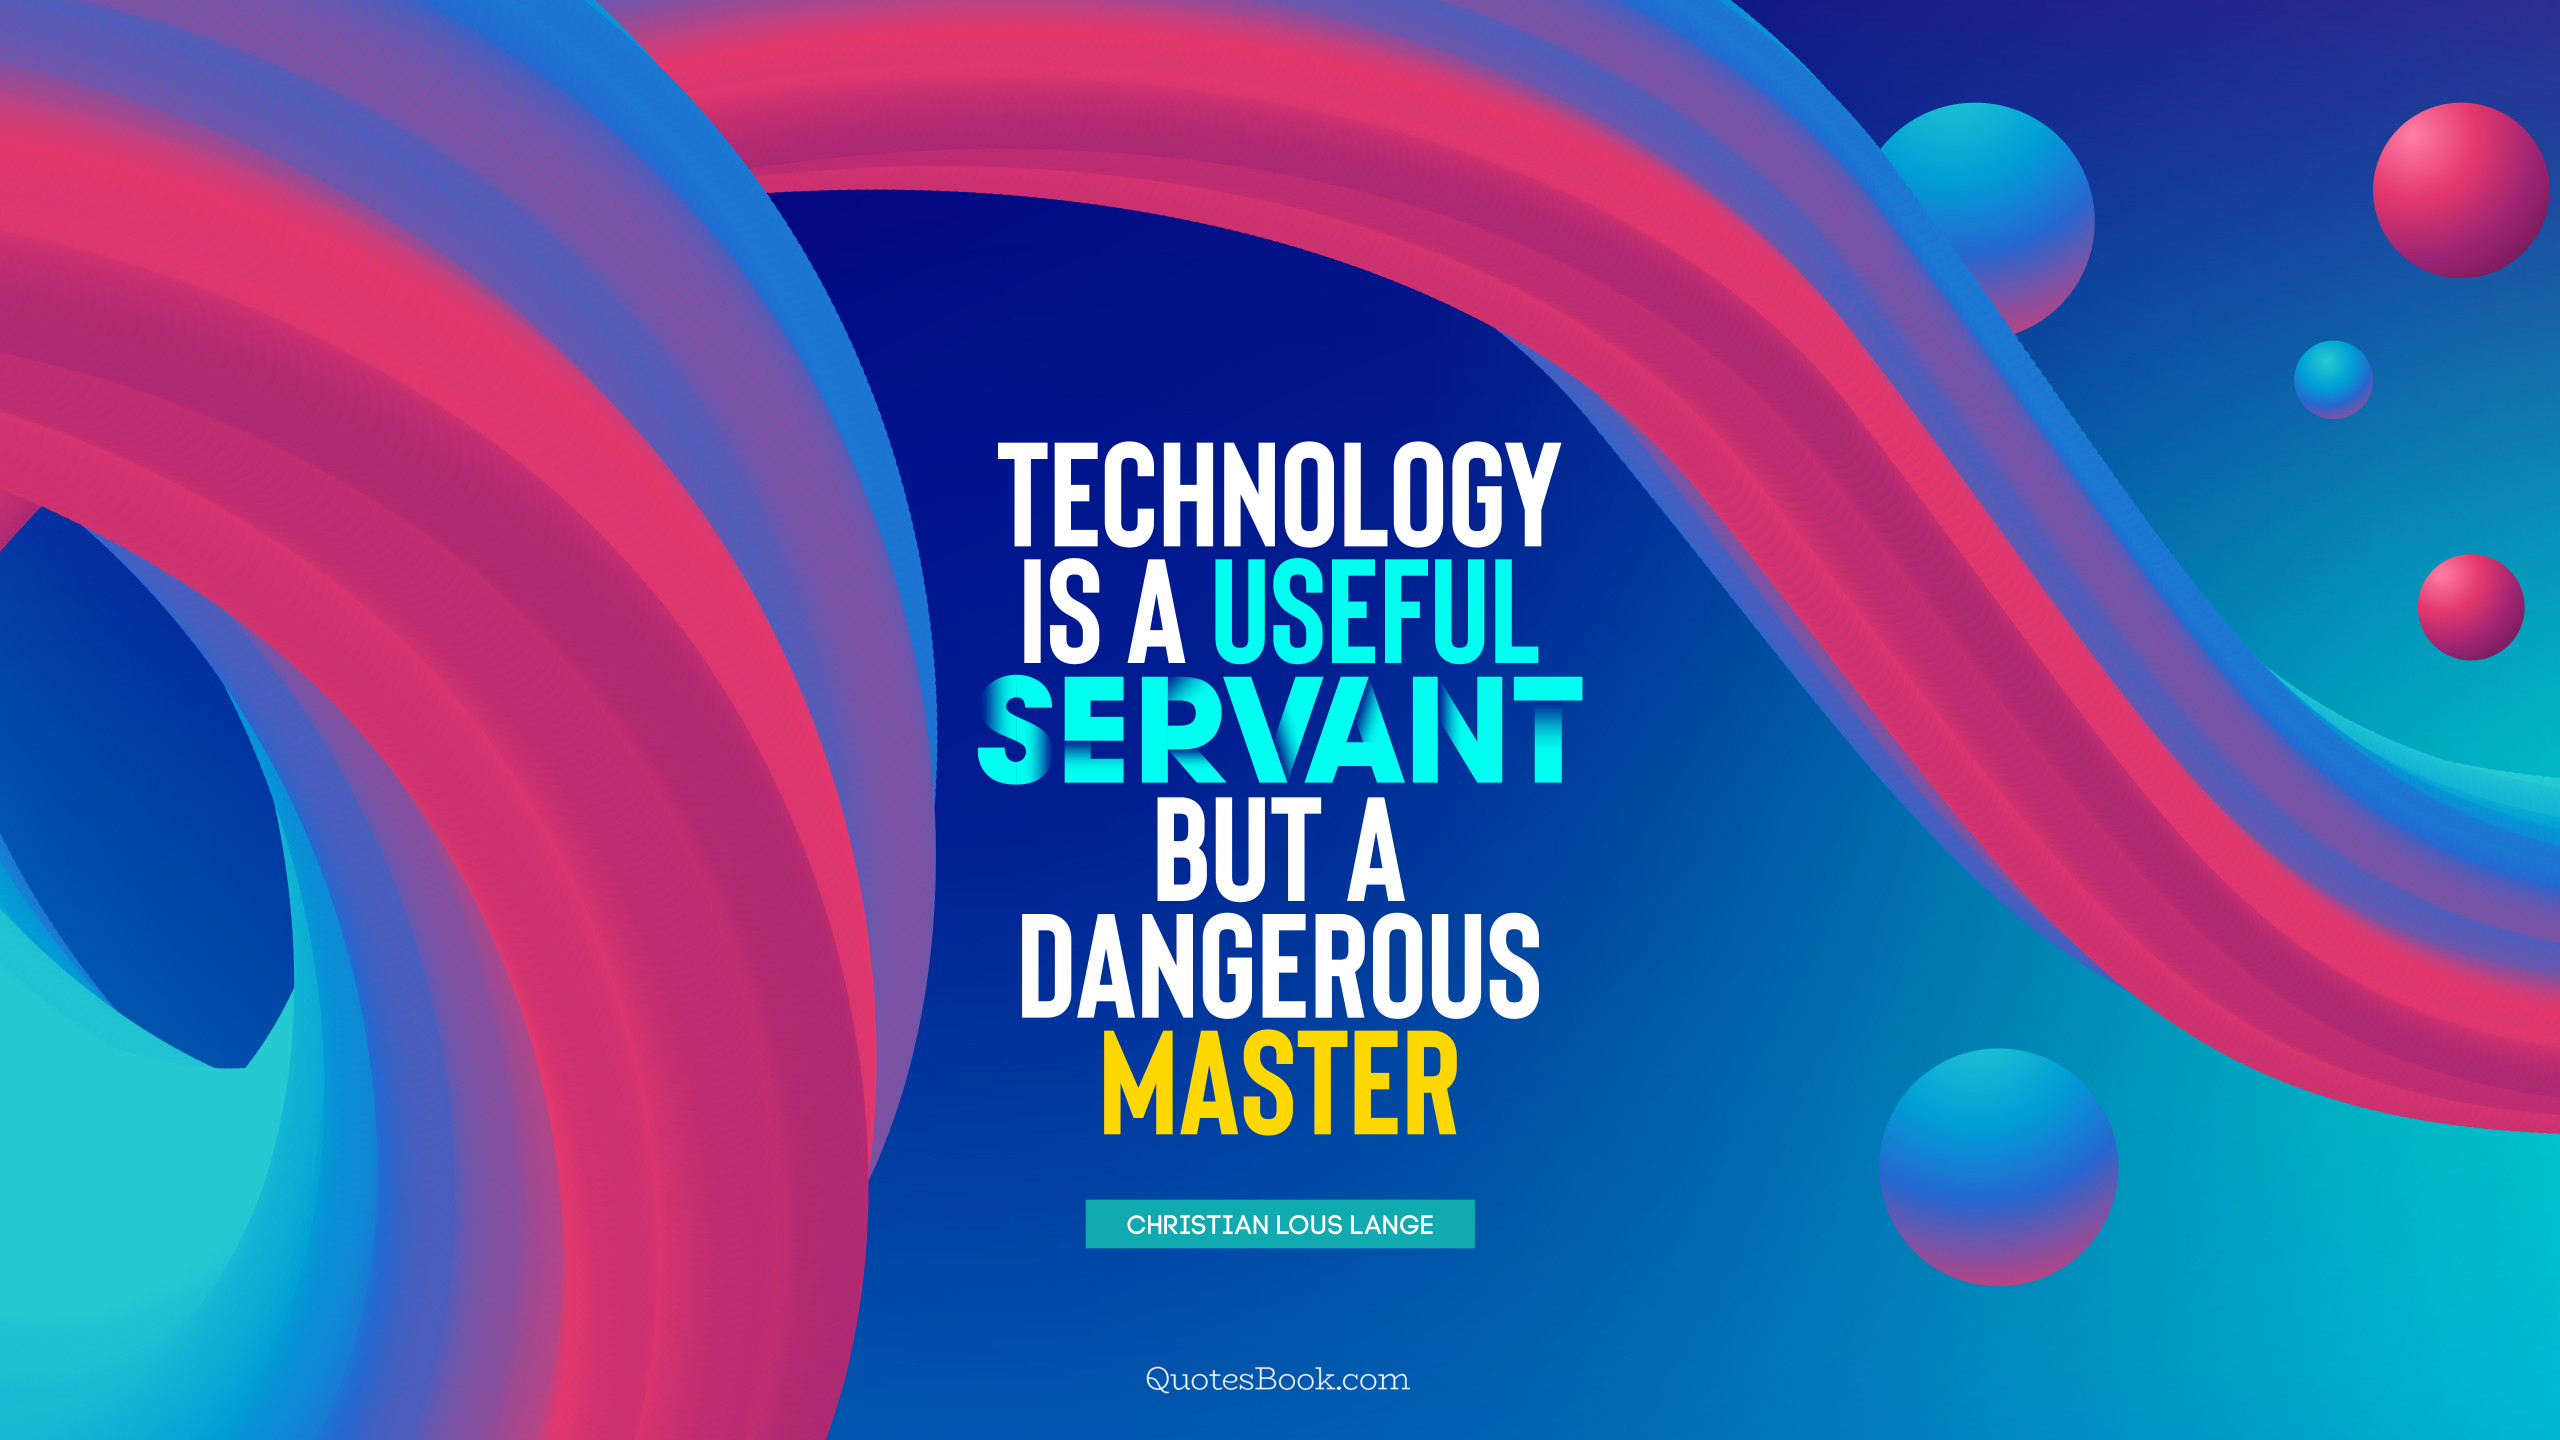 essay on technology is a useful servant but dangerous master